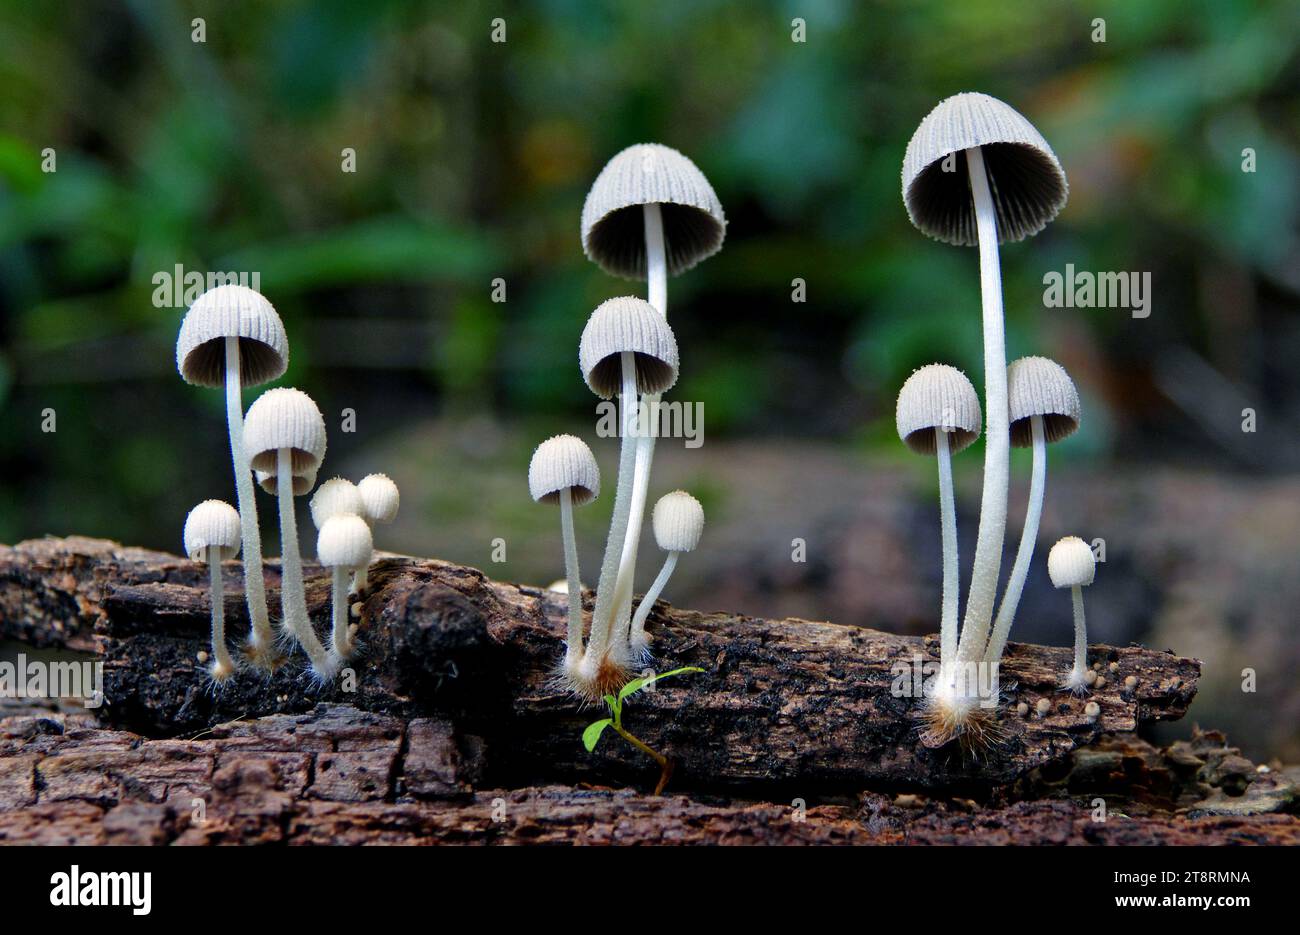 Mycena. sp, Mycena is a large genus of small saprotrophic mushrooms that are rarely more than a few centimeters in width. They are characterized by a white spore print, a small conical or bell-shaped cap, and a thin fragile stem Stock Photo